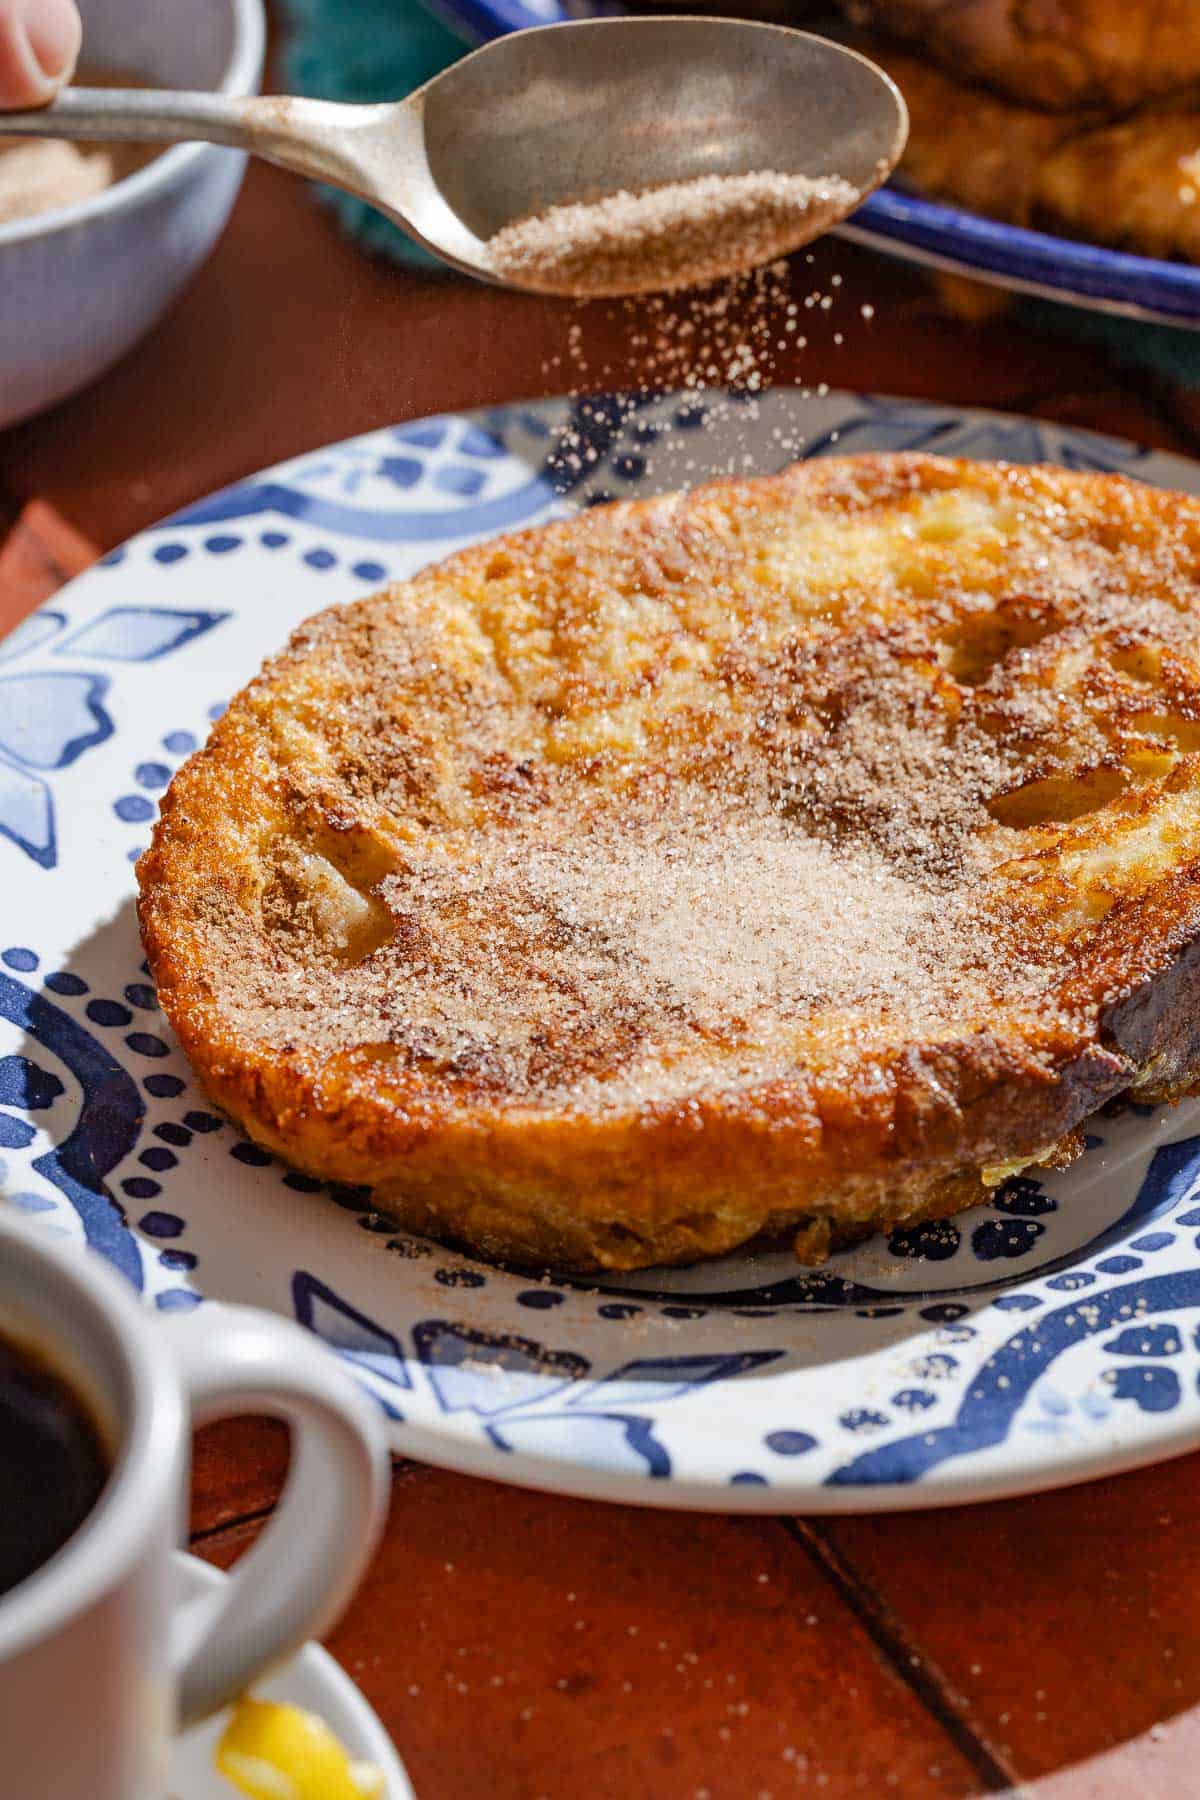 Cinnamon sugar being sprinkled from a spoon onto a torrija on a plate.